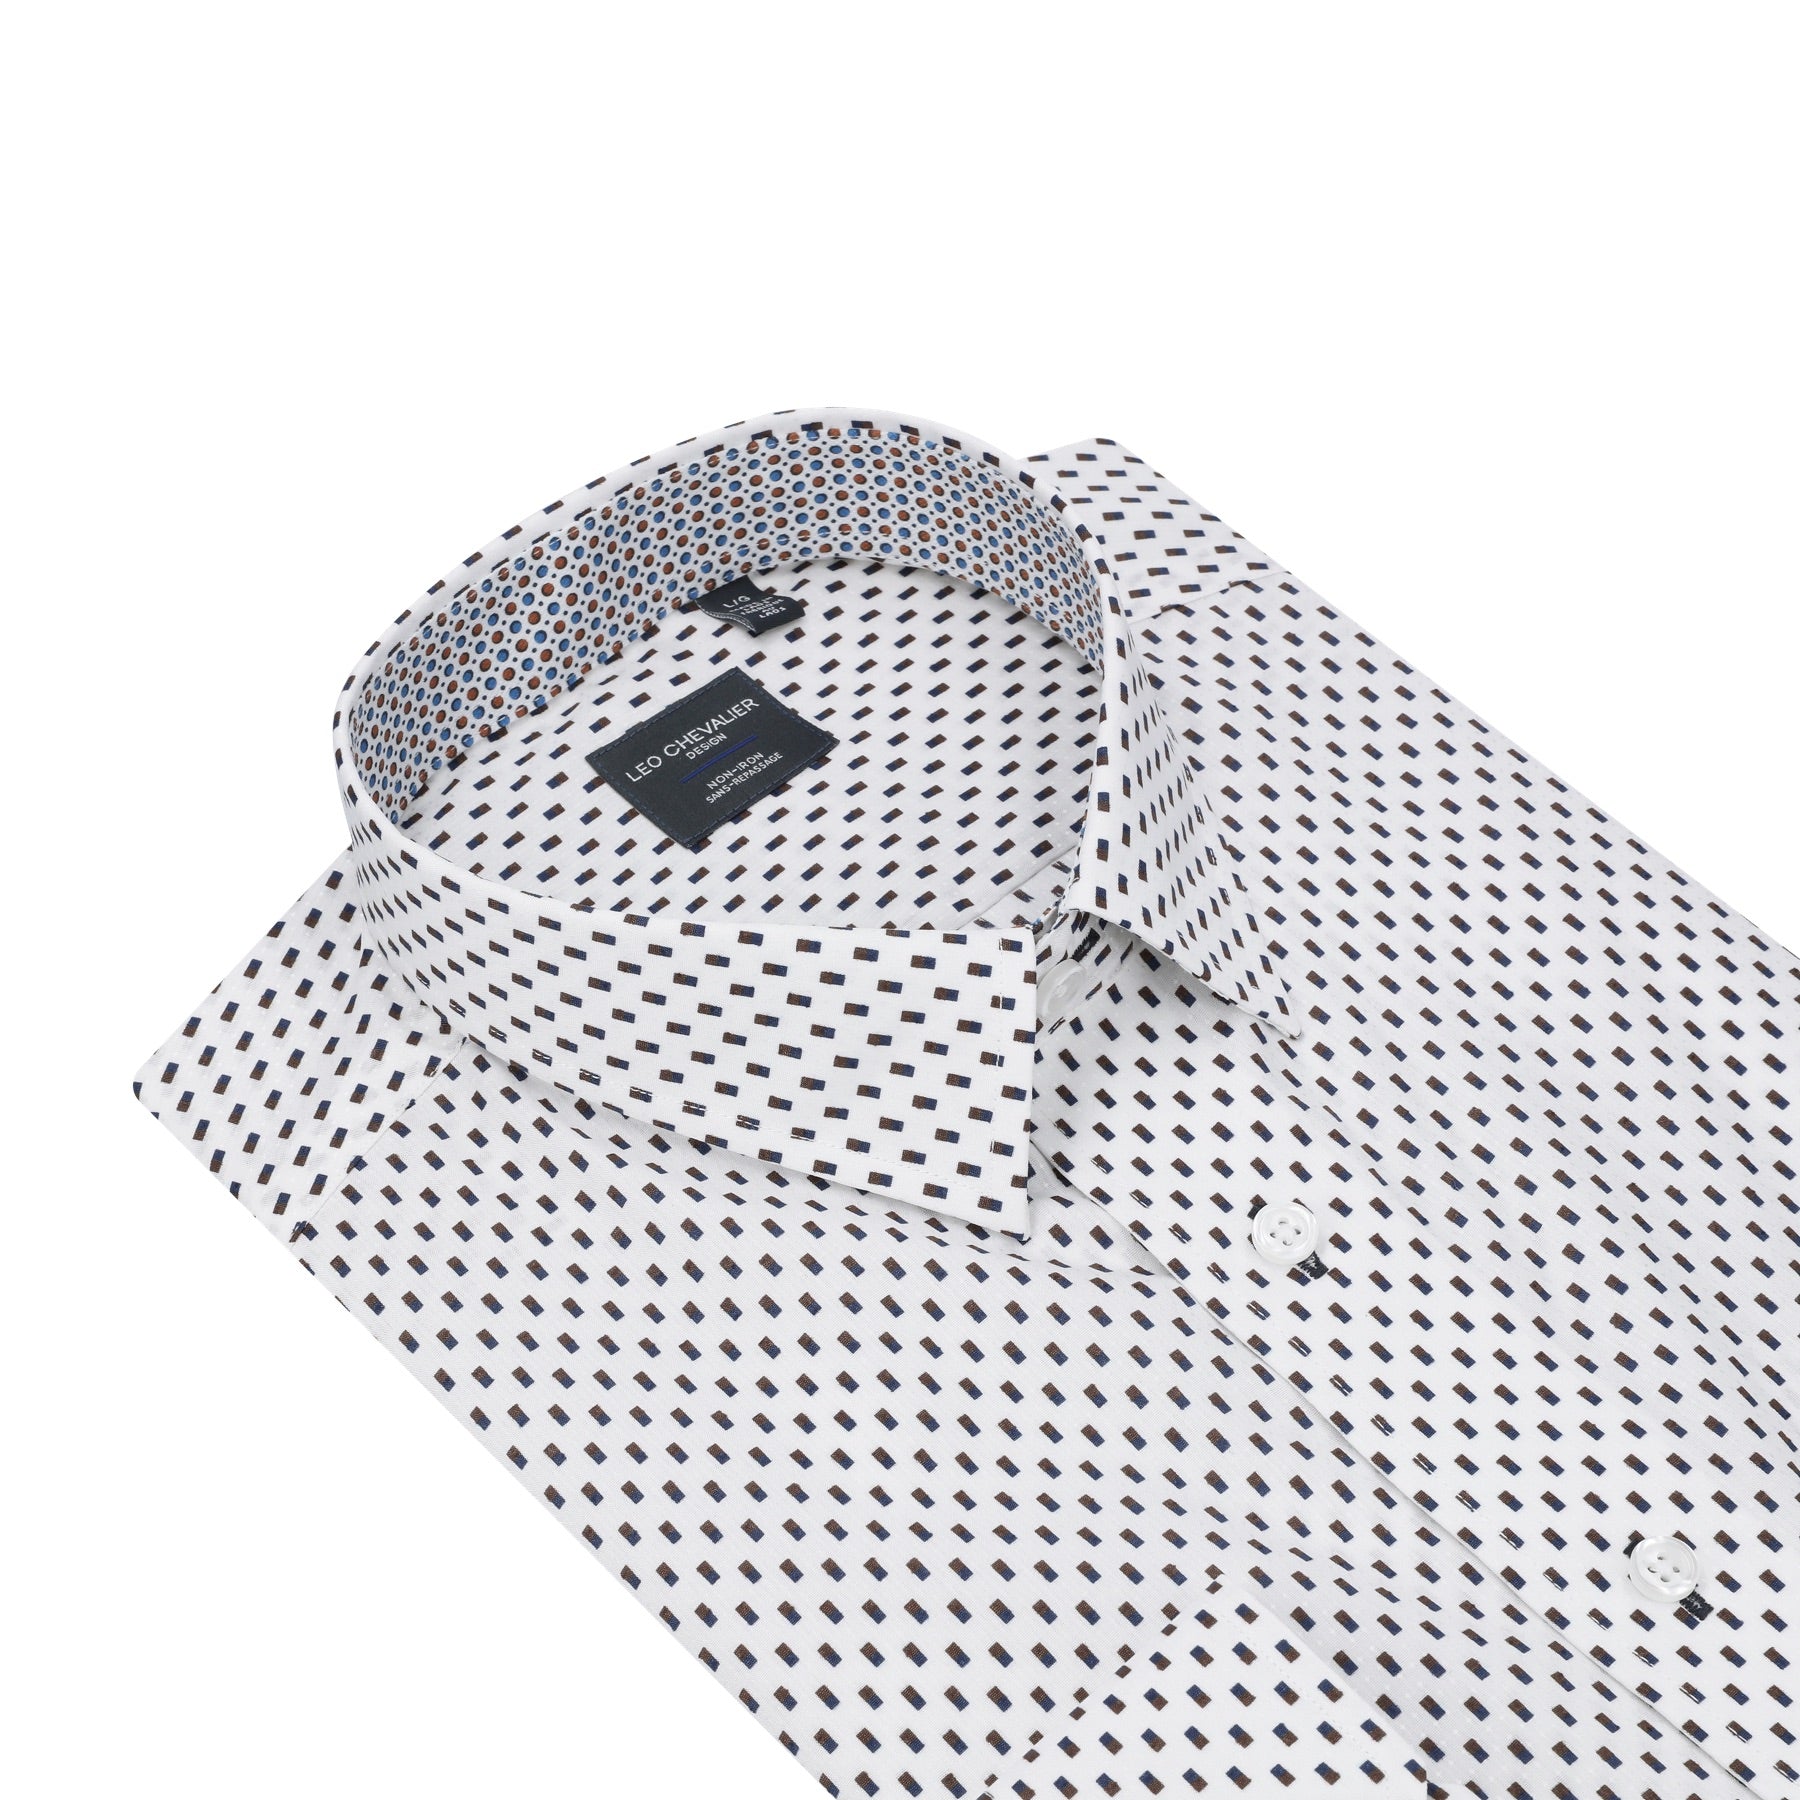 White, Blue, and Brown Rectangular Print No-Iron Cotton Sport Shirt with Hidden Button Down Collar by Leo Chevalier